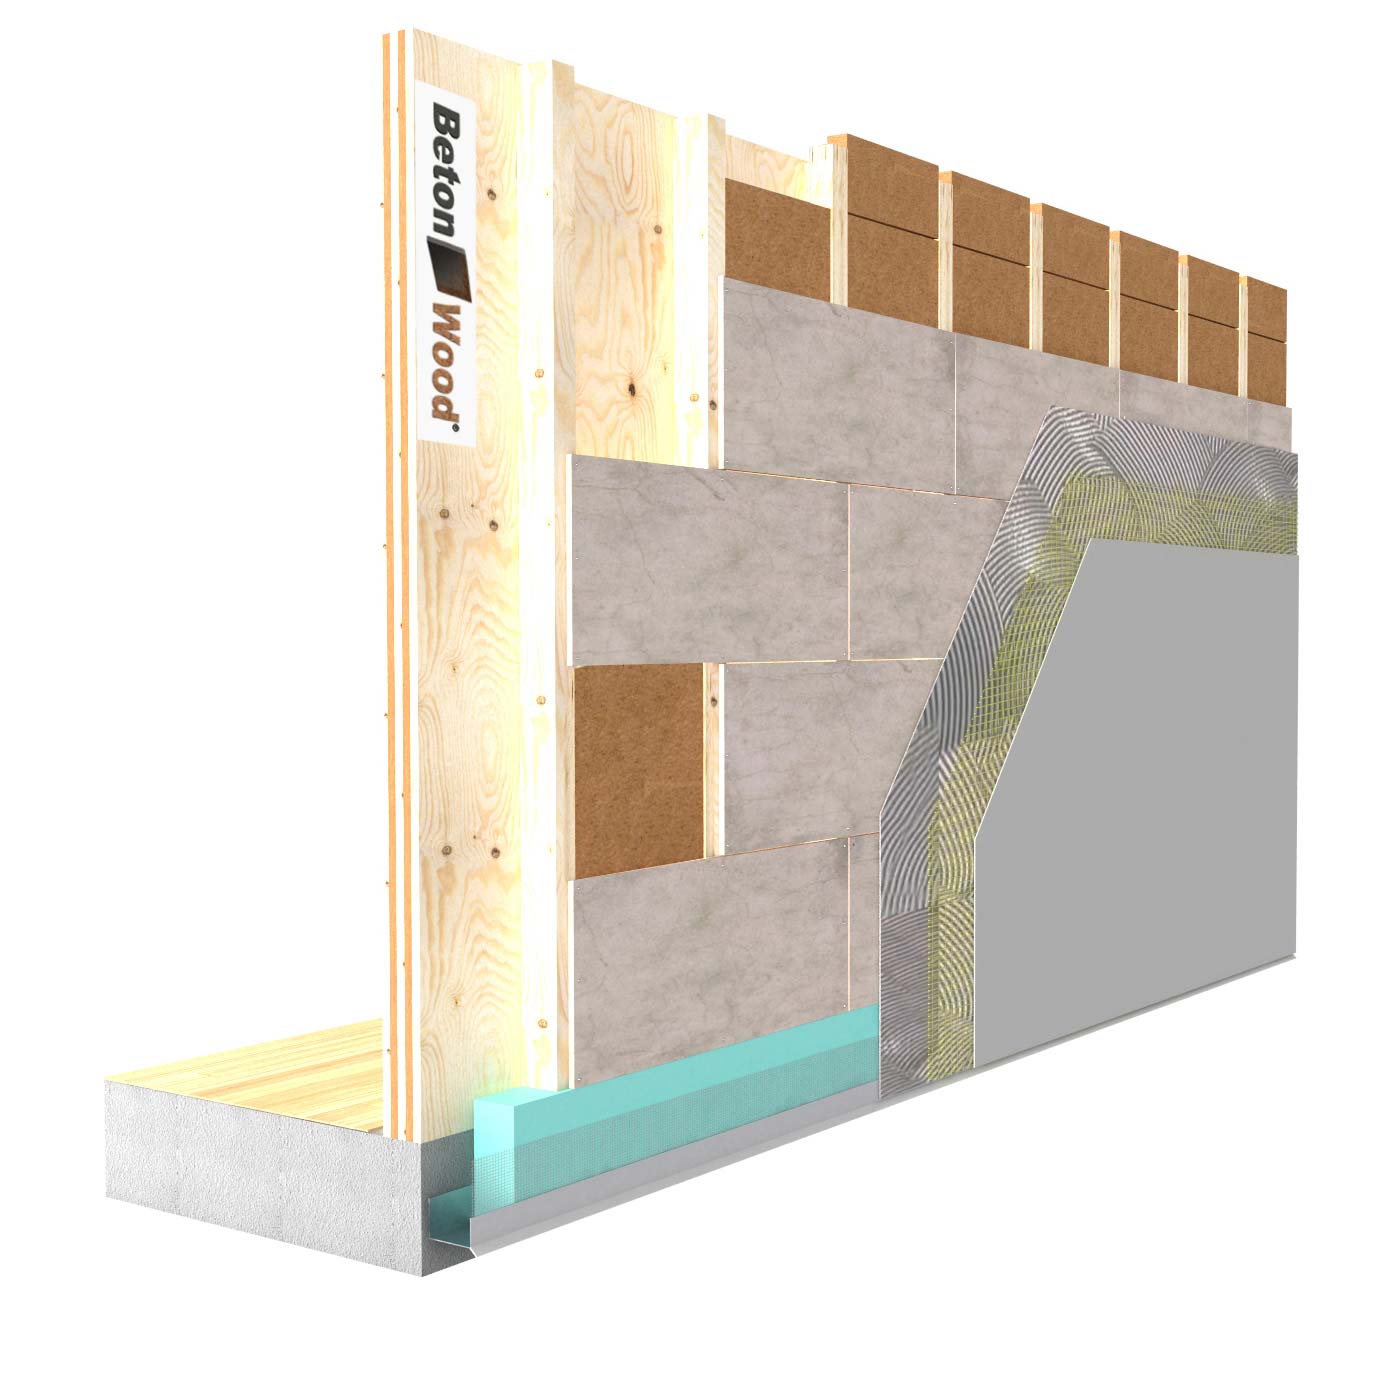 External insulation system with Therm SD wood fiber on wooden walls